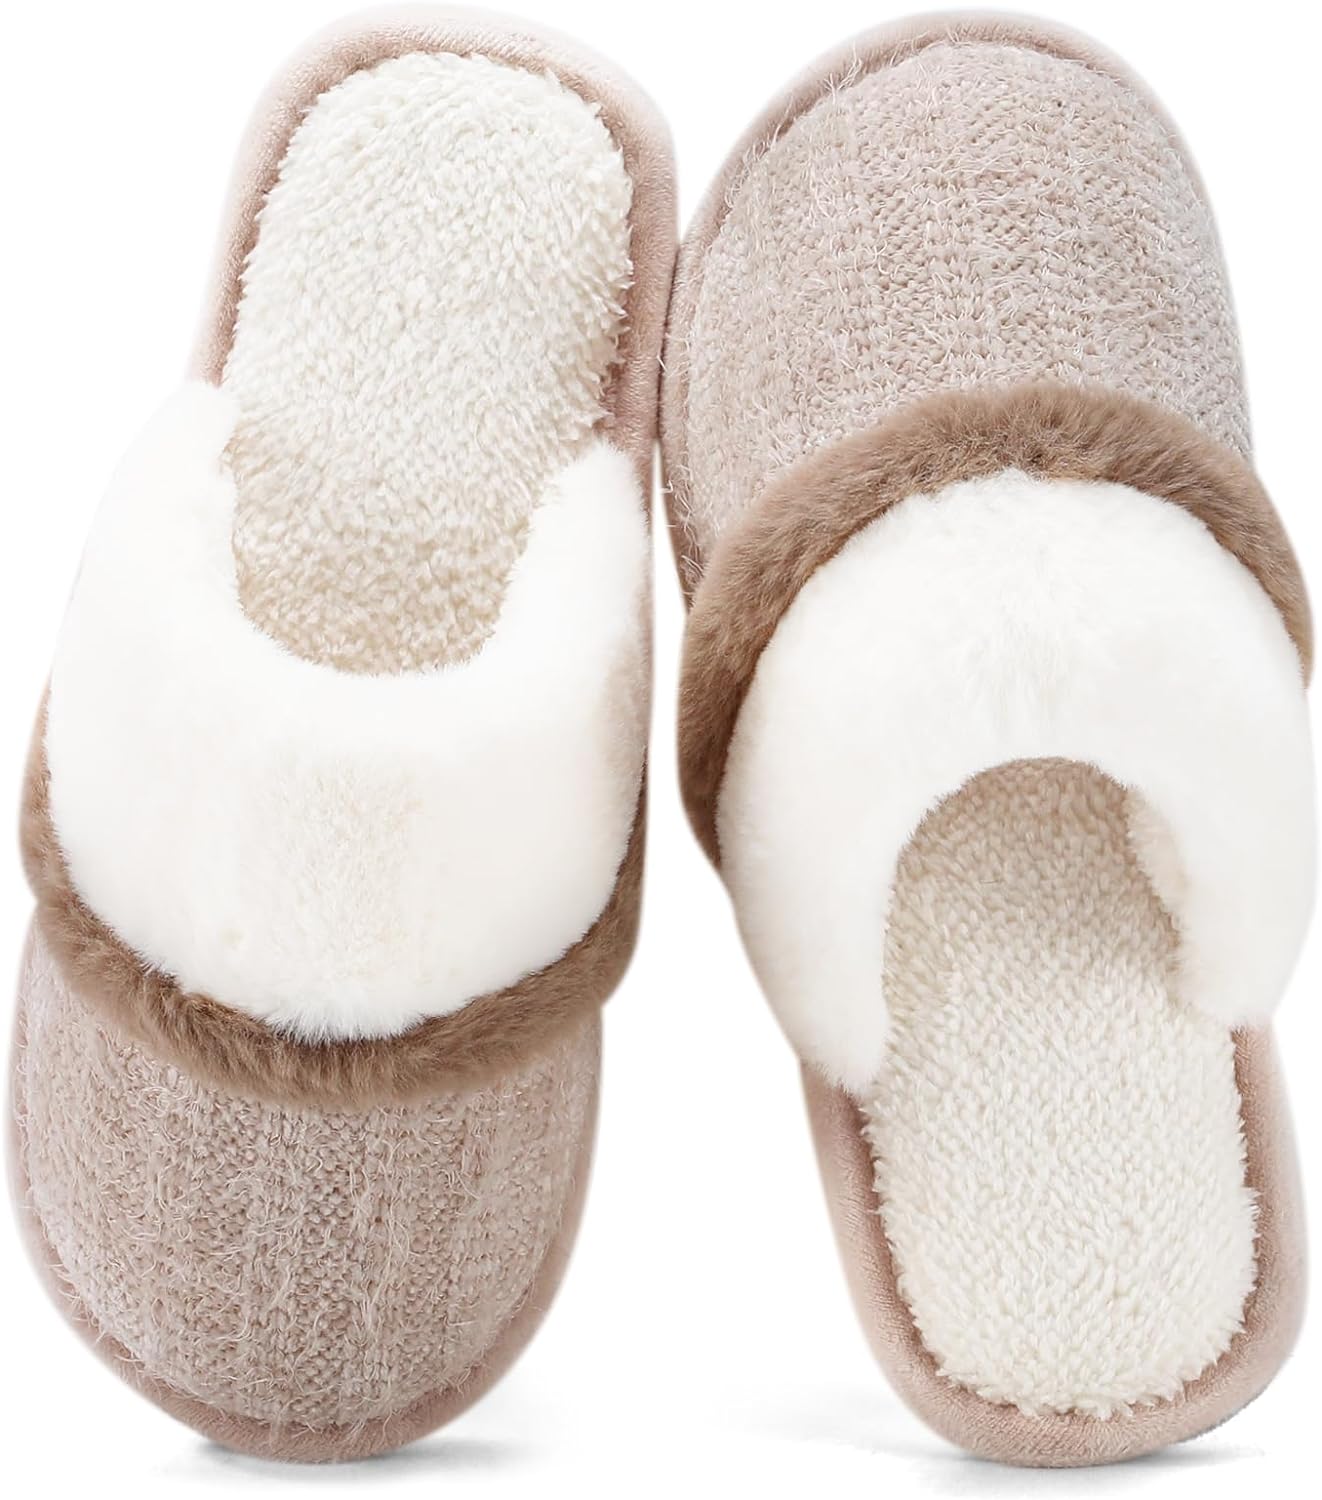 Cozy Slippers for Women Indoor and Outdoor Fuzzy House Shoes with Memory Foam Anti-Skid Sole Gifts for Women Mom Ladies